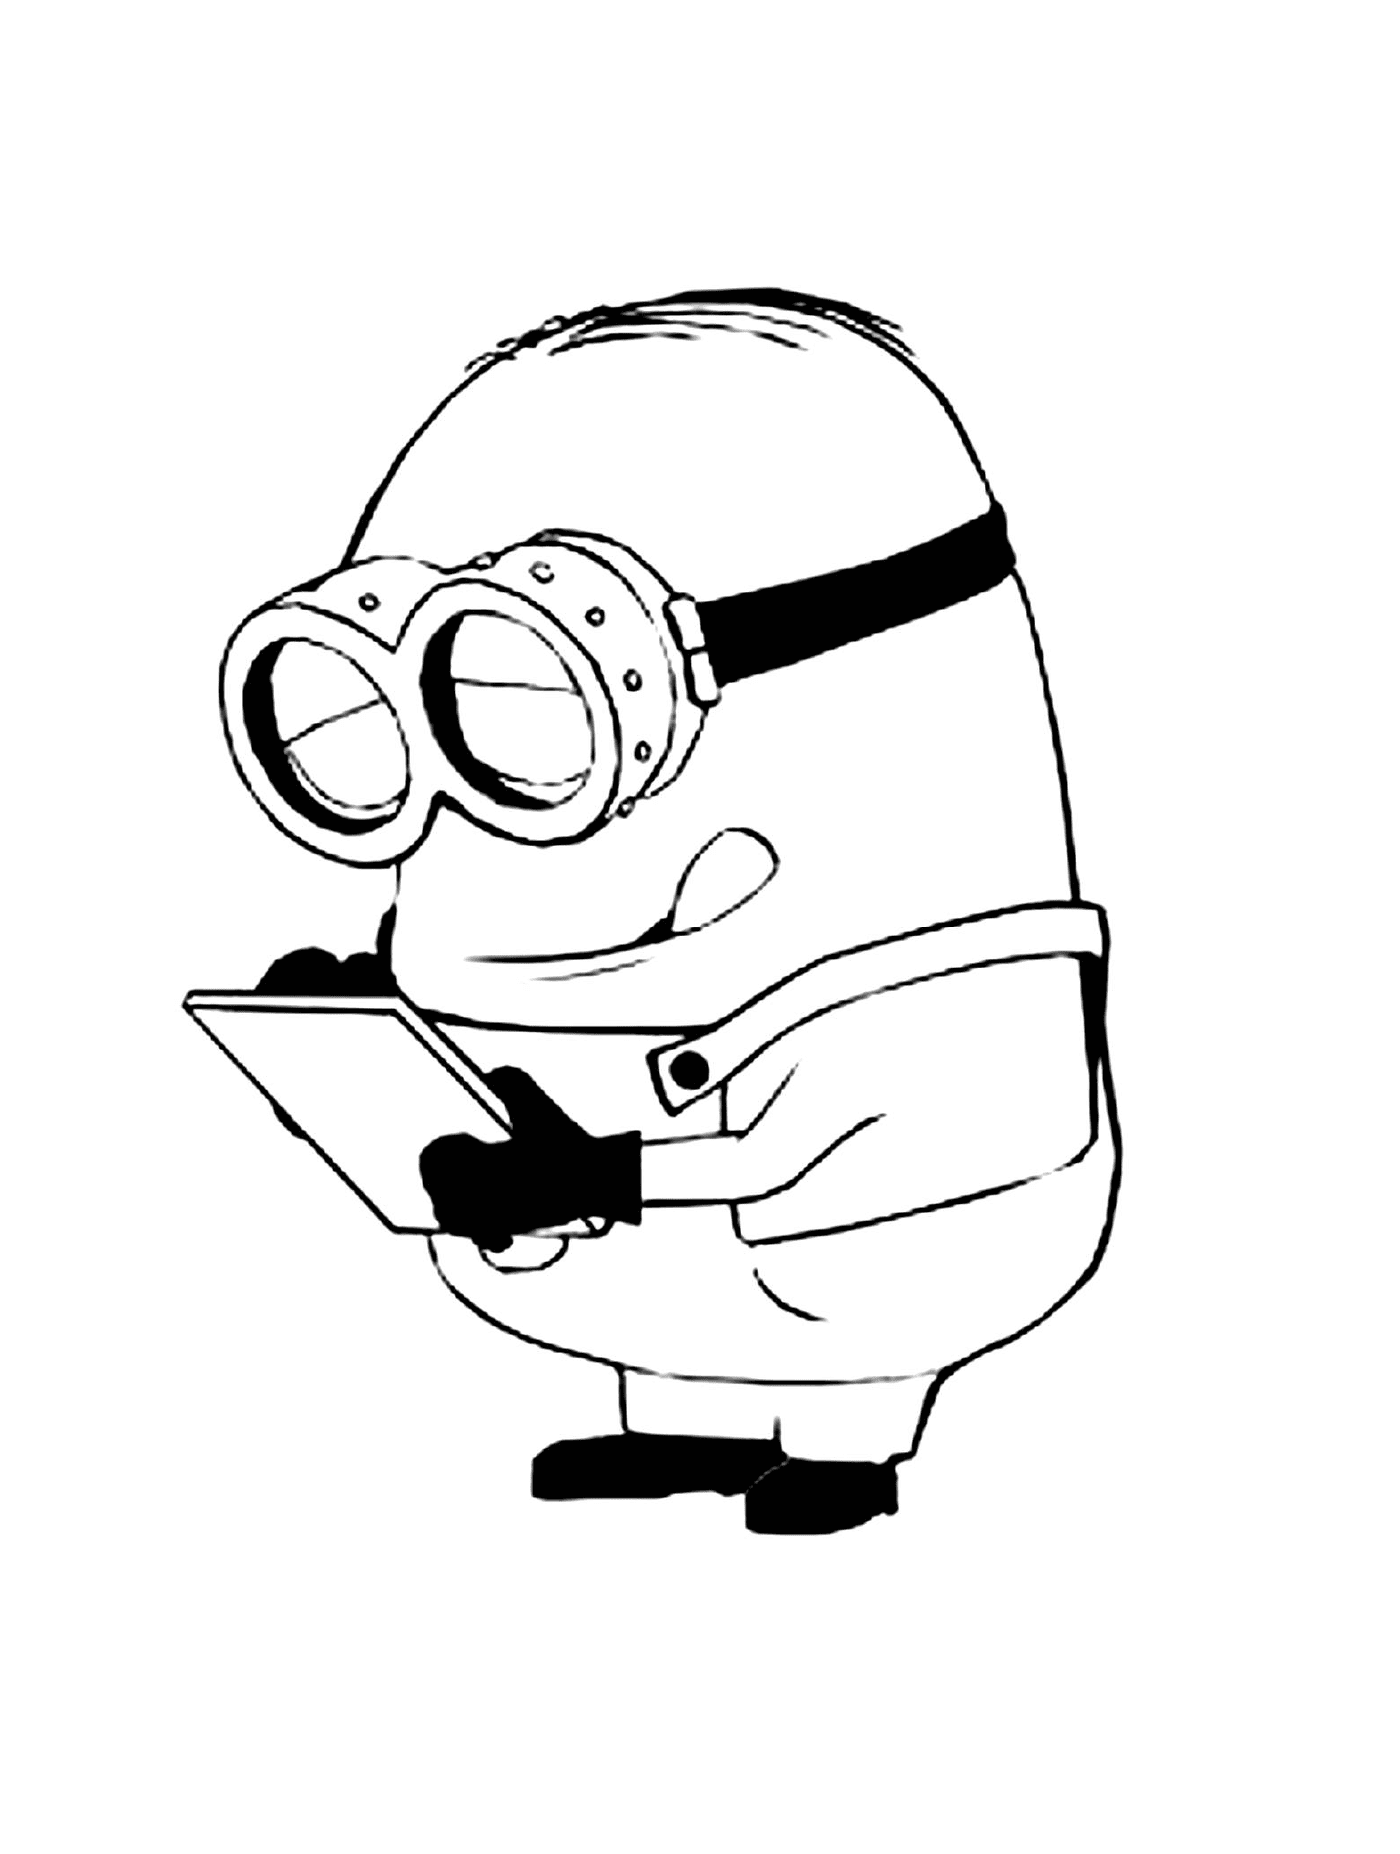  Minion at work, notepads in hand 